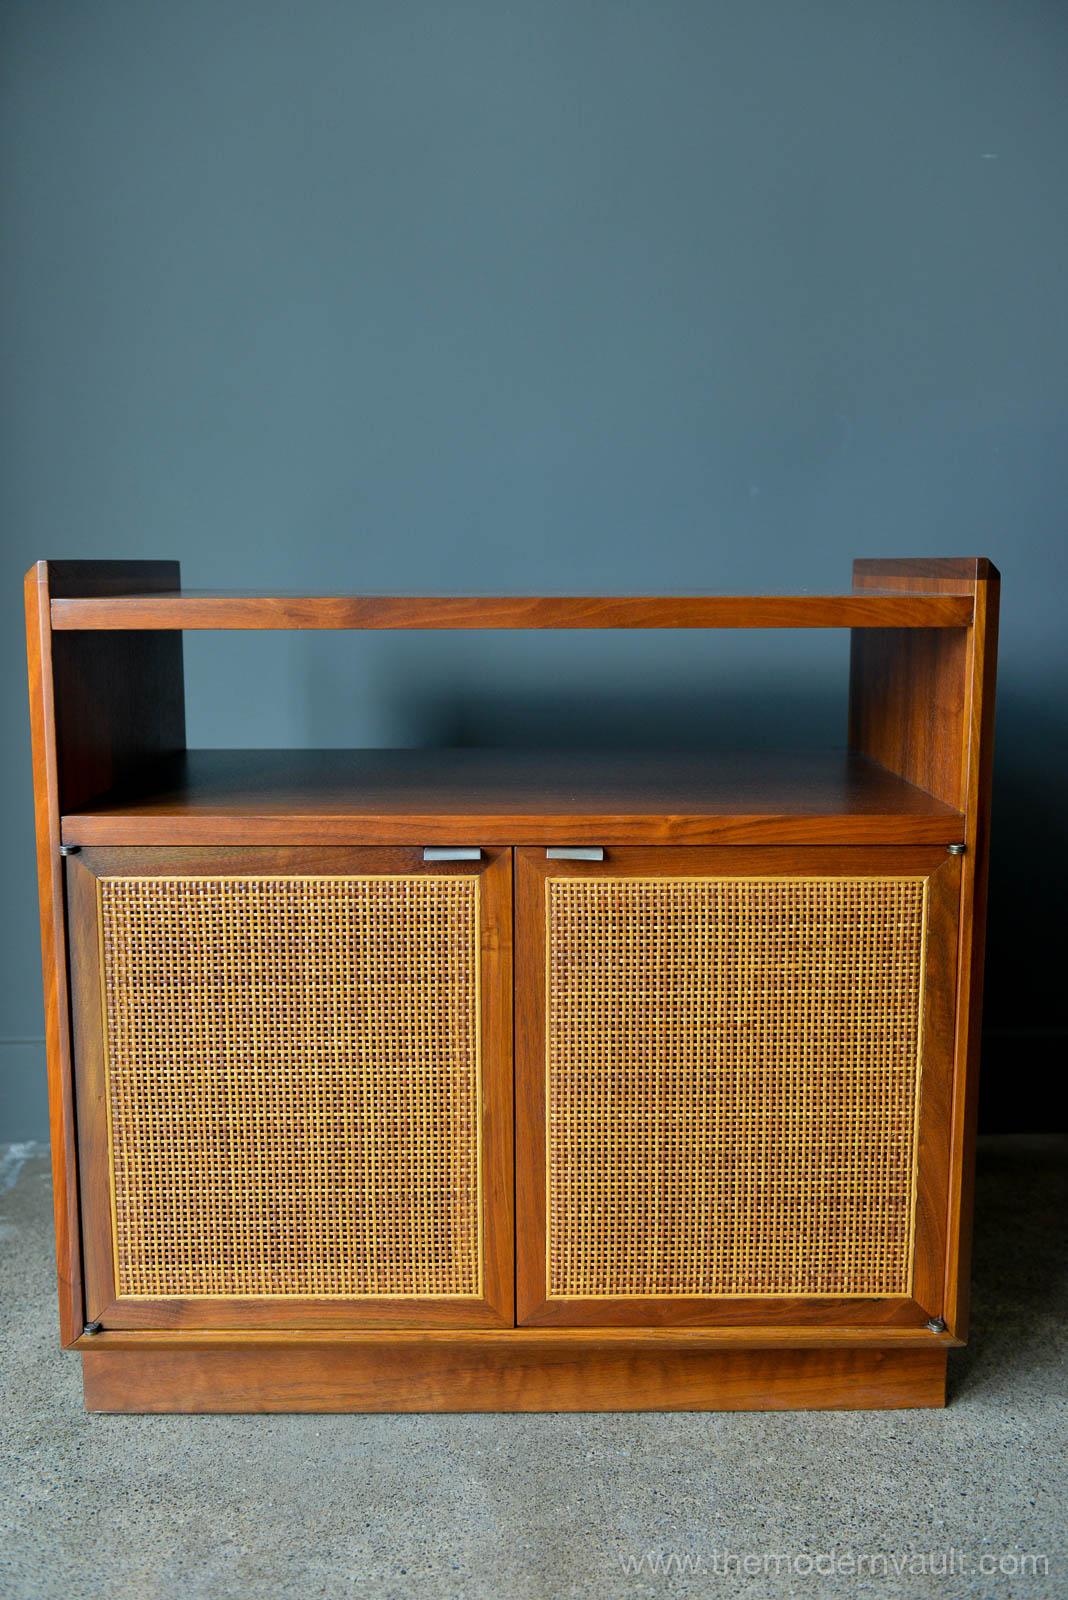 Walnut and cane cabinet or nightstand by Jack Cartwright for Founders, circa 1965. Professionally restored in perfect condition and finished on the reverse. Perfect as a single nightstand or even in a home office for a printer/accessory stand or